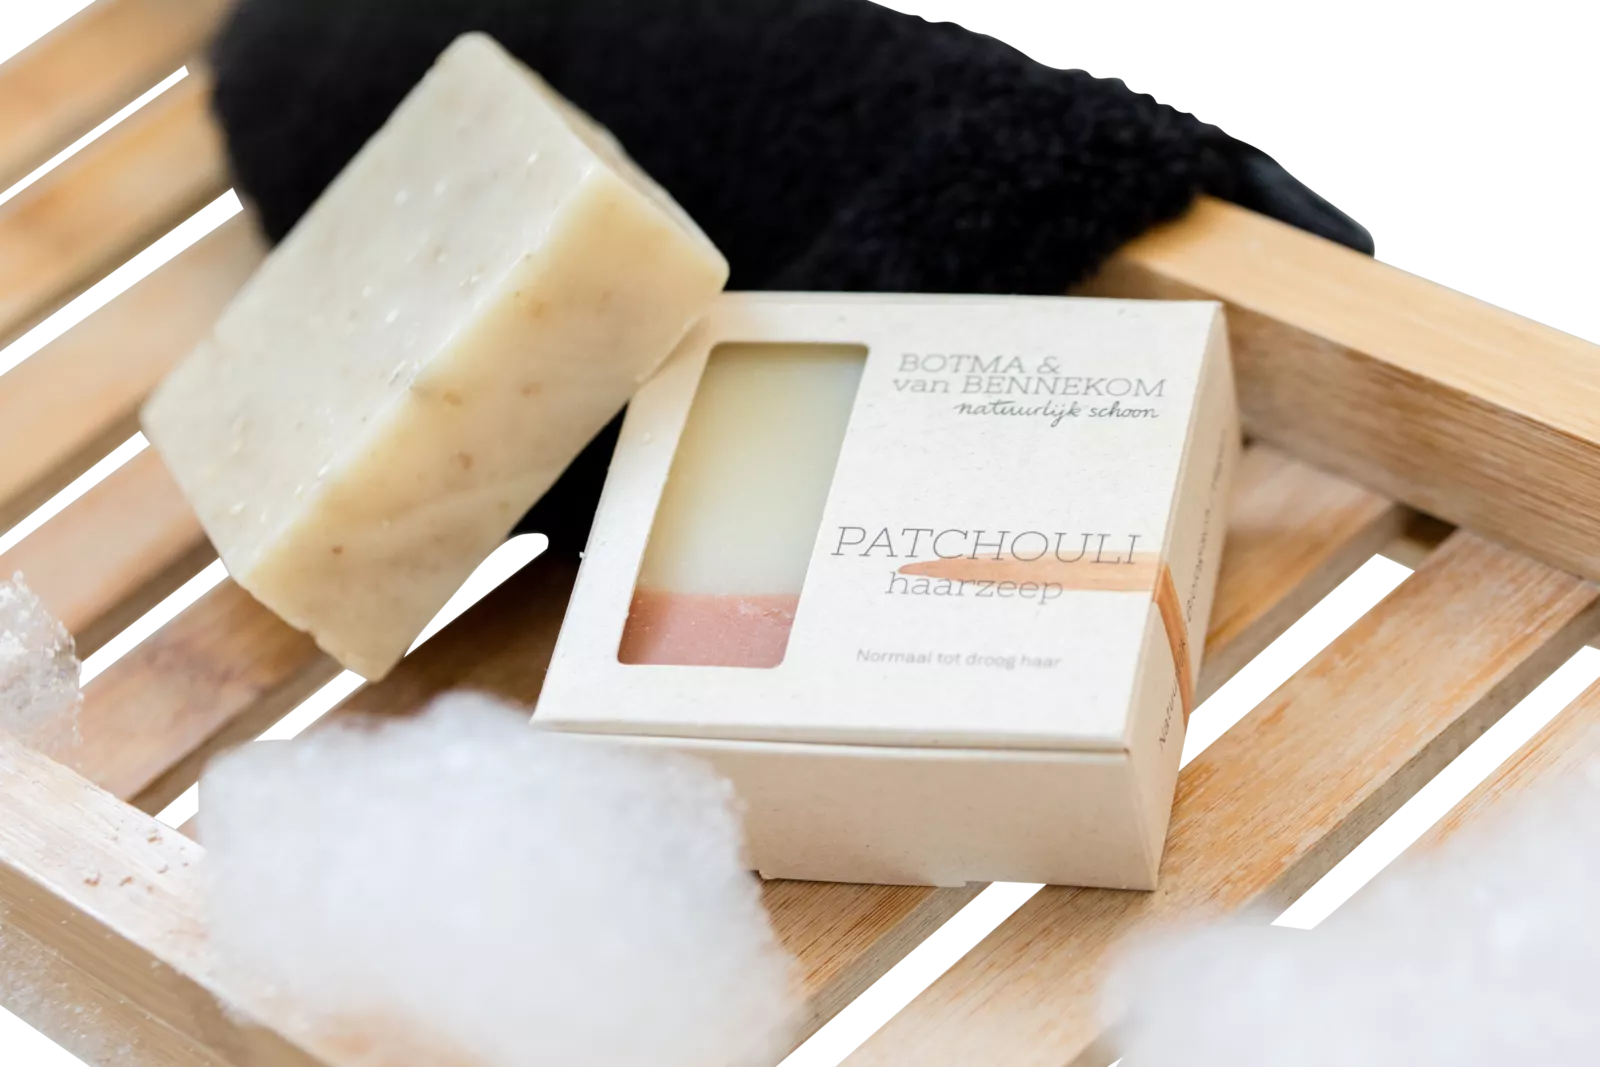 PaperWise eco friendly paper sustainablesoap bar box packaging BotmaenvanBennekom c